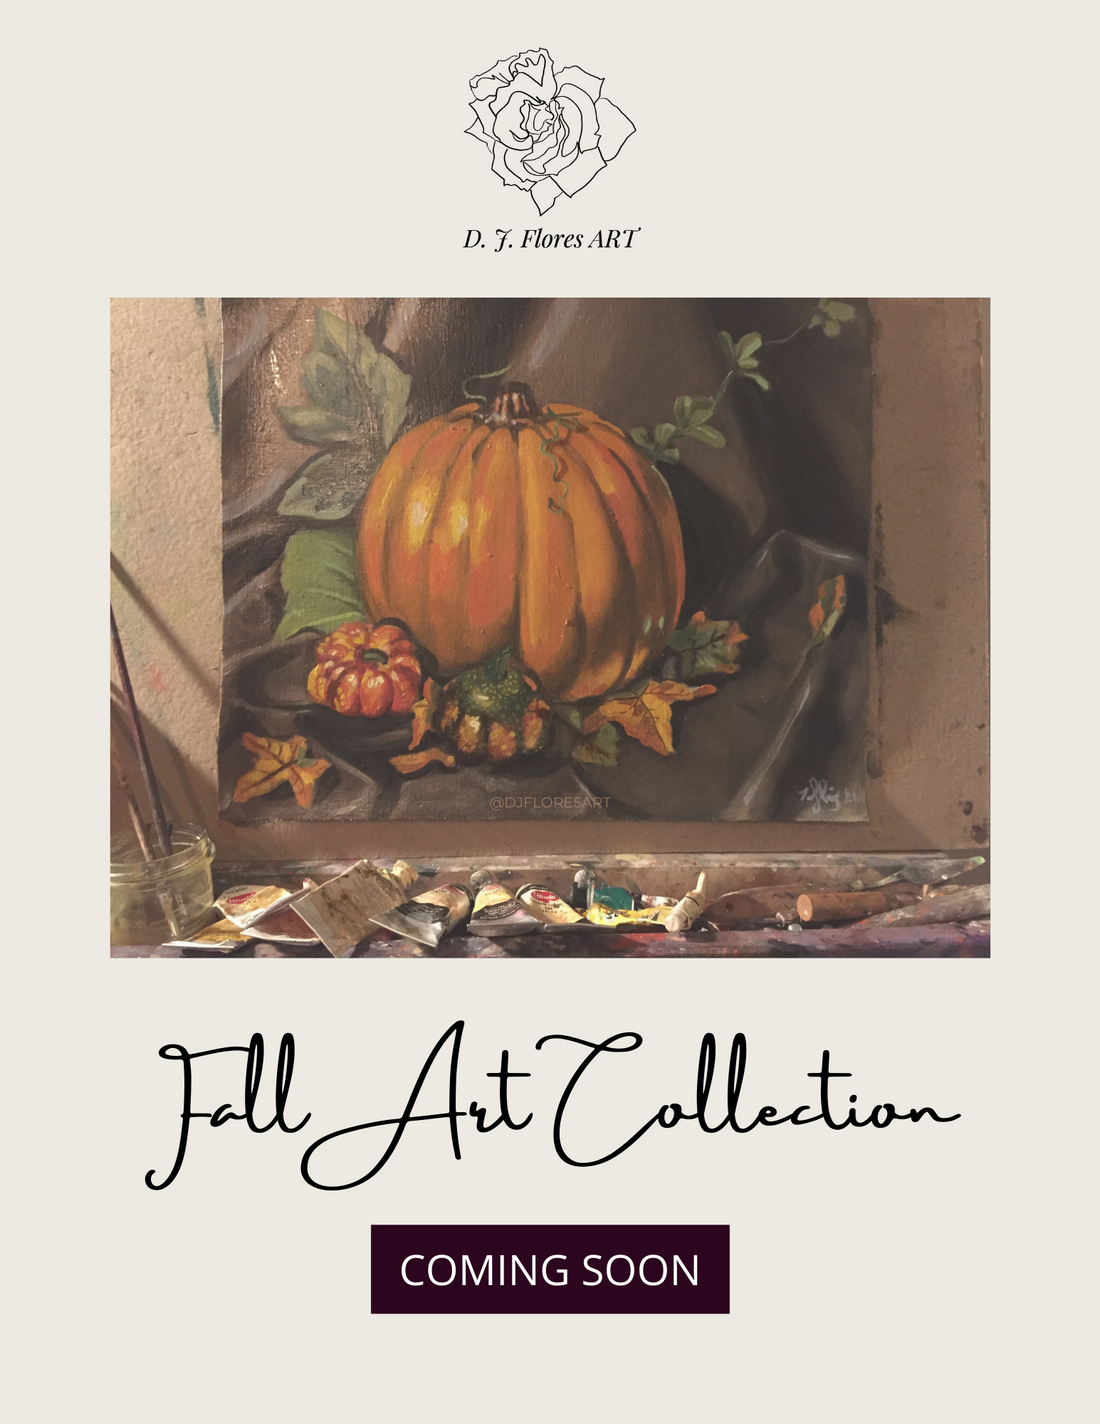 JOURNAL ENTRY #16: Savoring the Season - Fall Art Collection